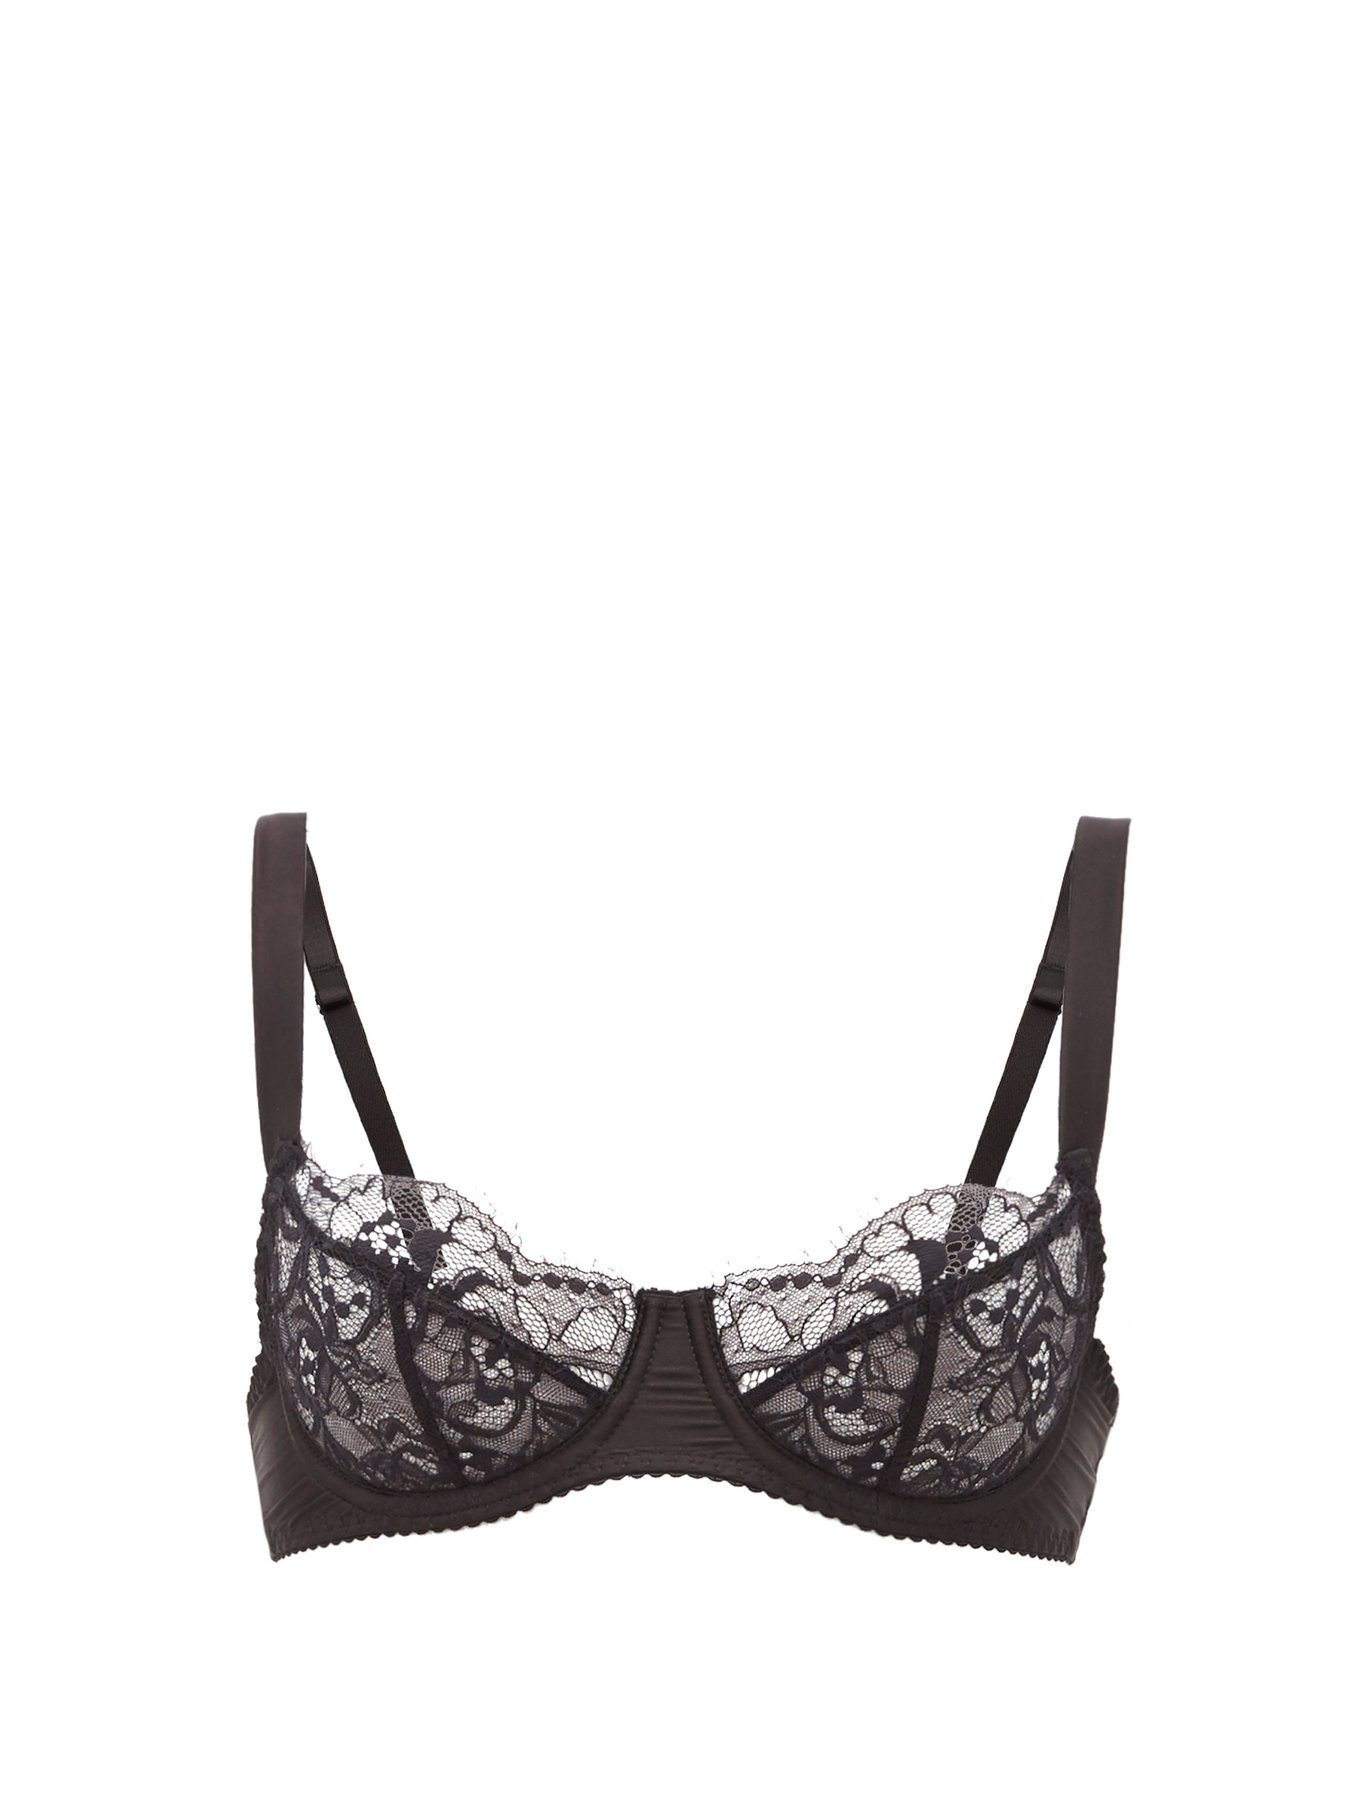 Details about   Fleur Of England Berry Kiss Lace Balcony Bra 32DD